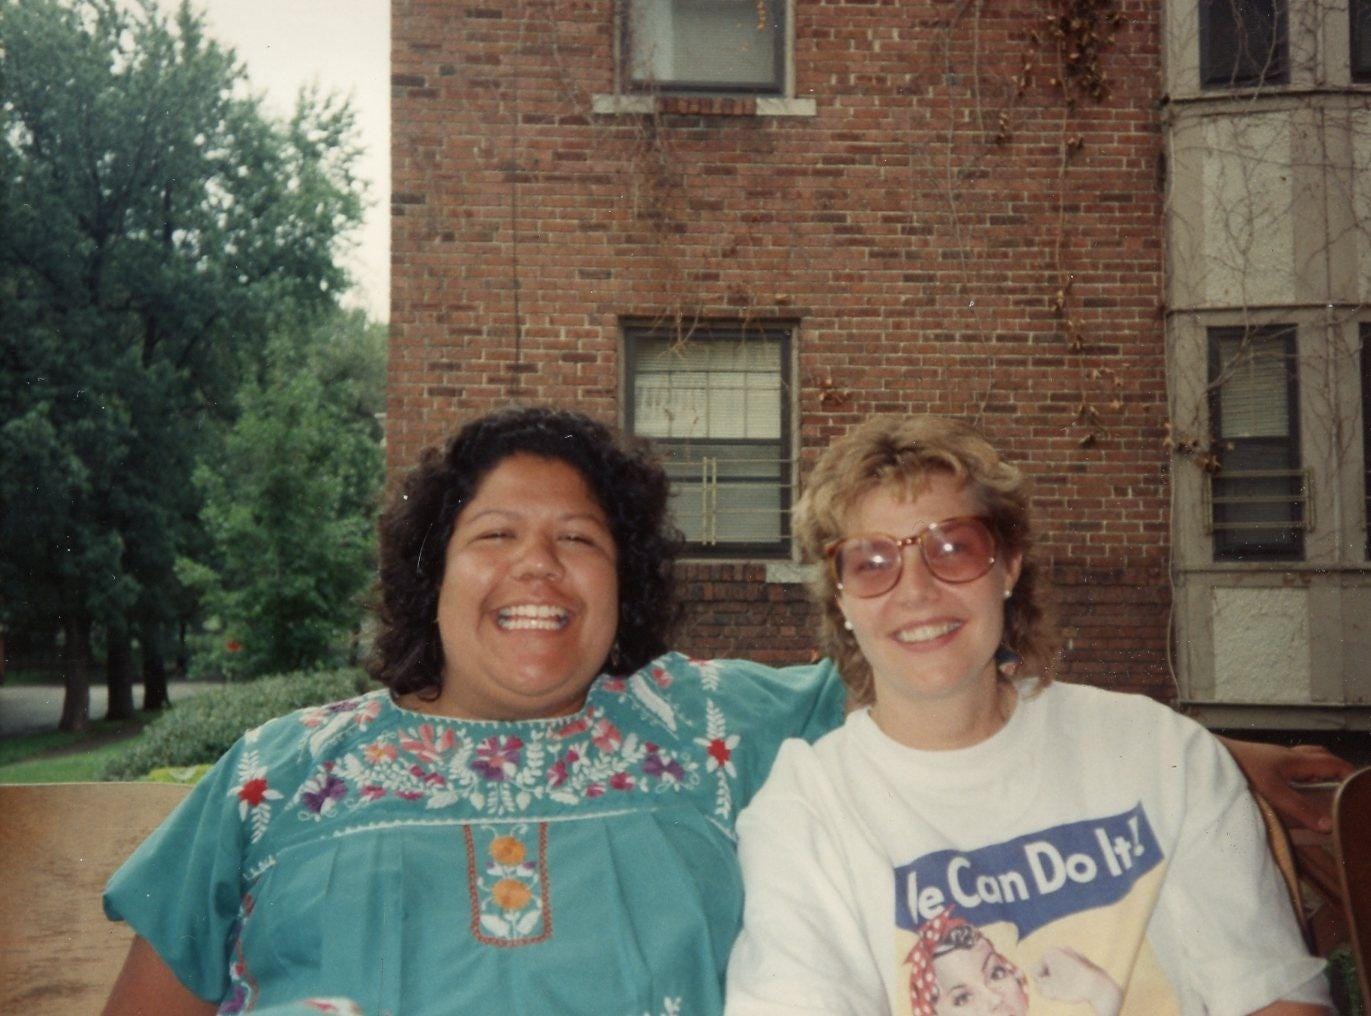 A Chicana woman wearing a traditional embroidered turquoise shirt, with a radiant smile on her face ringed by curly brown hair. She sits with her arm draped over the shoulders of a white blonde woman wearing a 'We Can Do It!' t-shirt and beige tinted glasses.